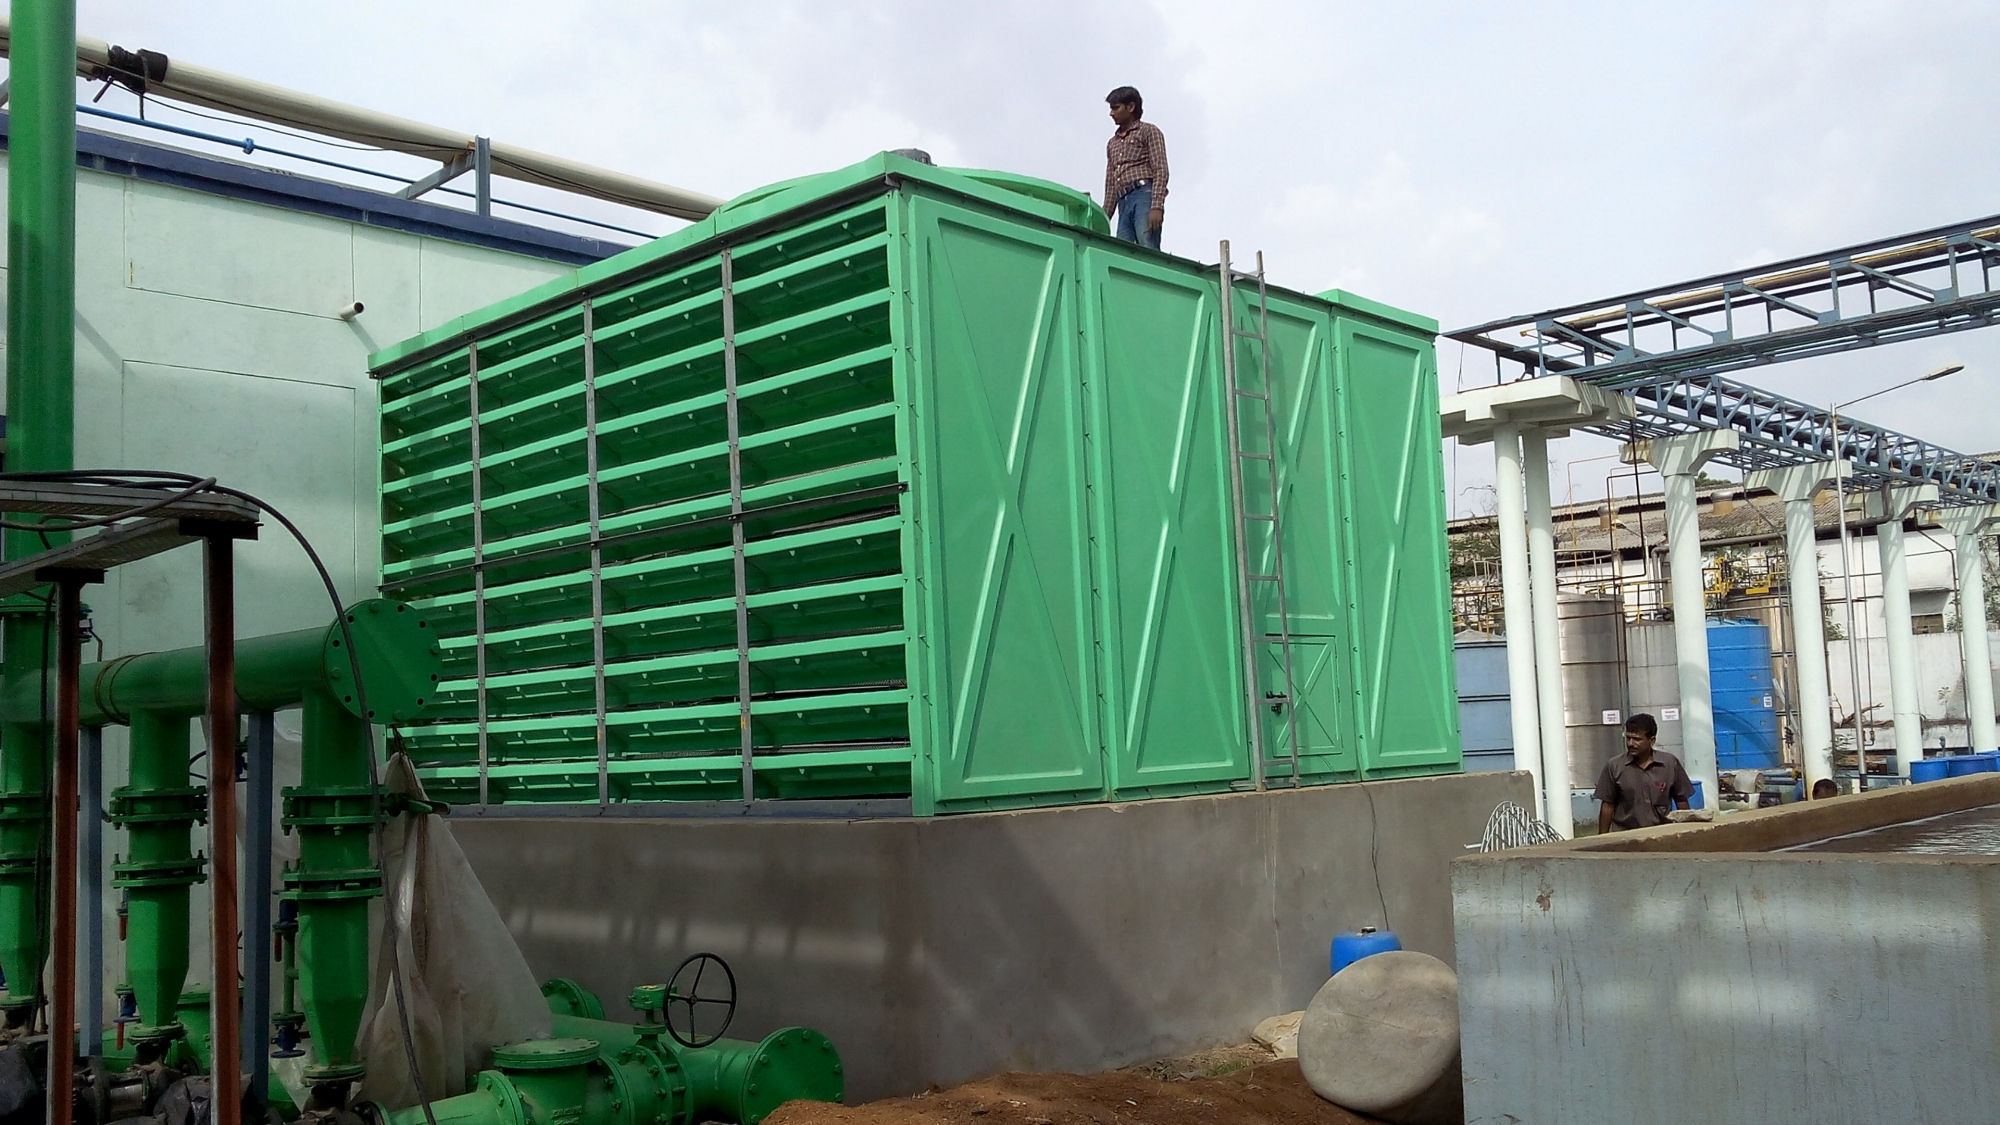 AVANI ARTECH COOLING TOWERS PVT. LTD., Timber Counter Flow Cooling Tower manufacturer in Hyderabad,Timber Counter Flow Cooling Tower in Visakhapatnam,Timber Counter Flow Cooling Tower in Vijaywada,Timber Counter Flow Cooling Tower in AP